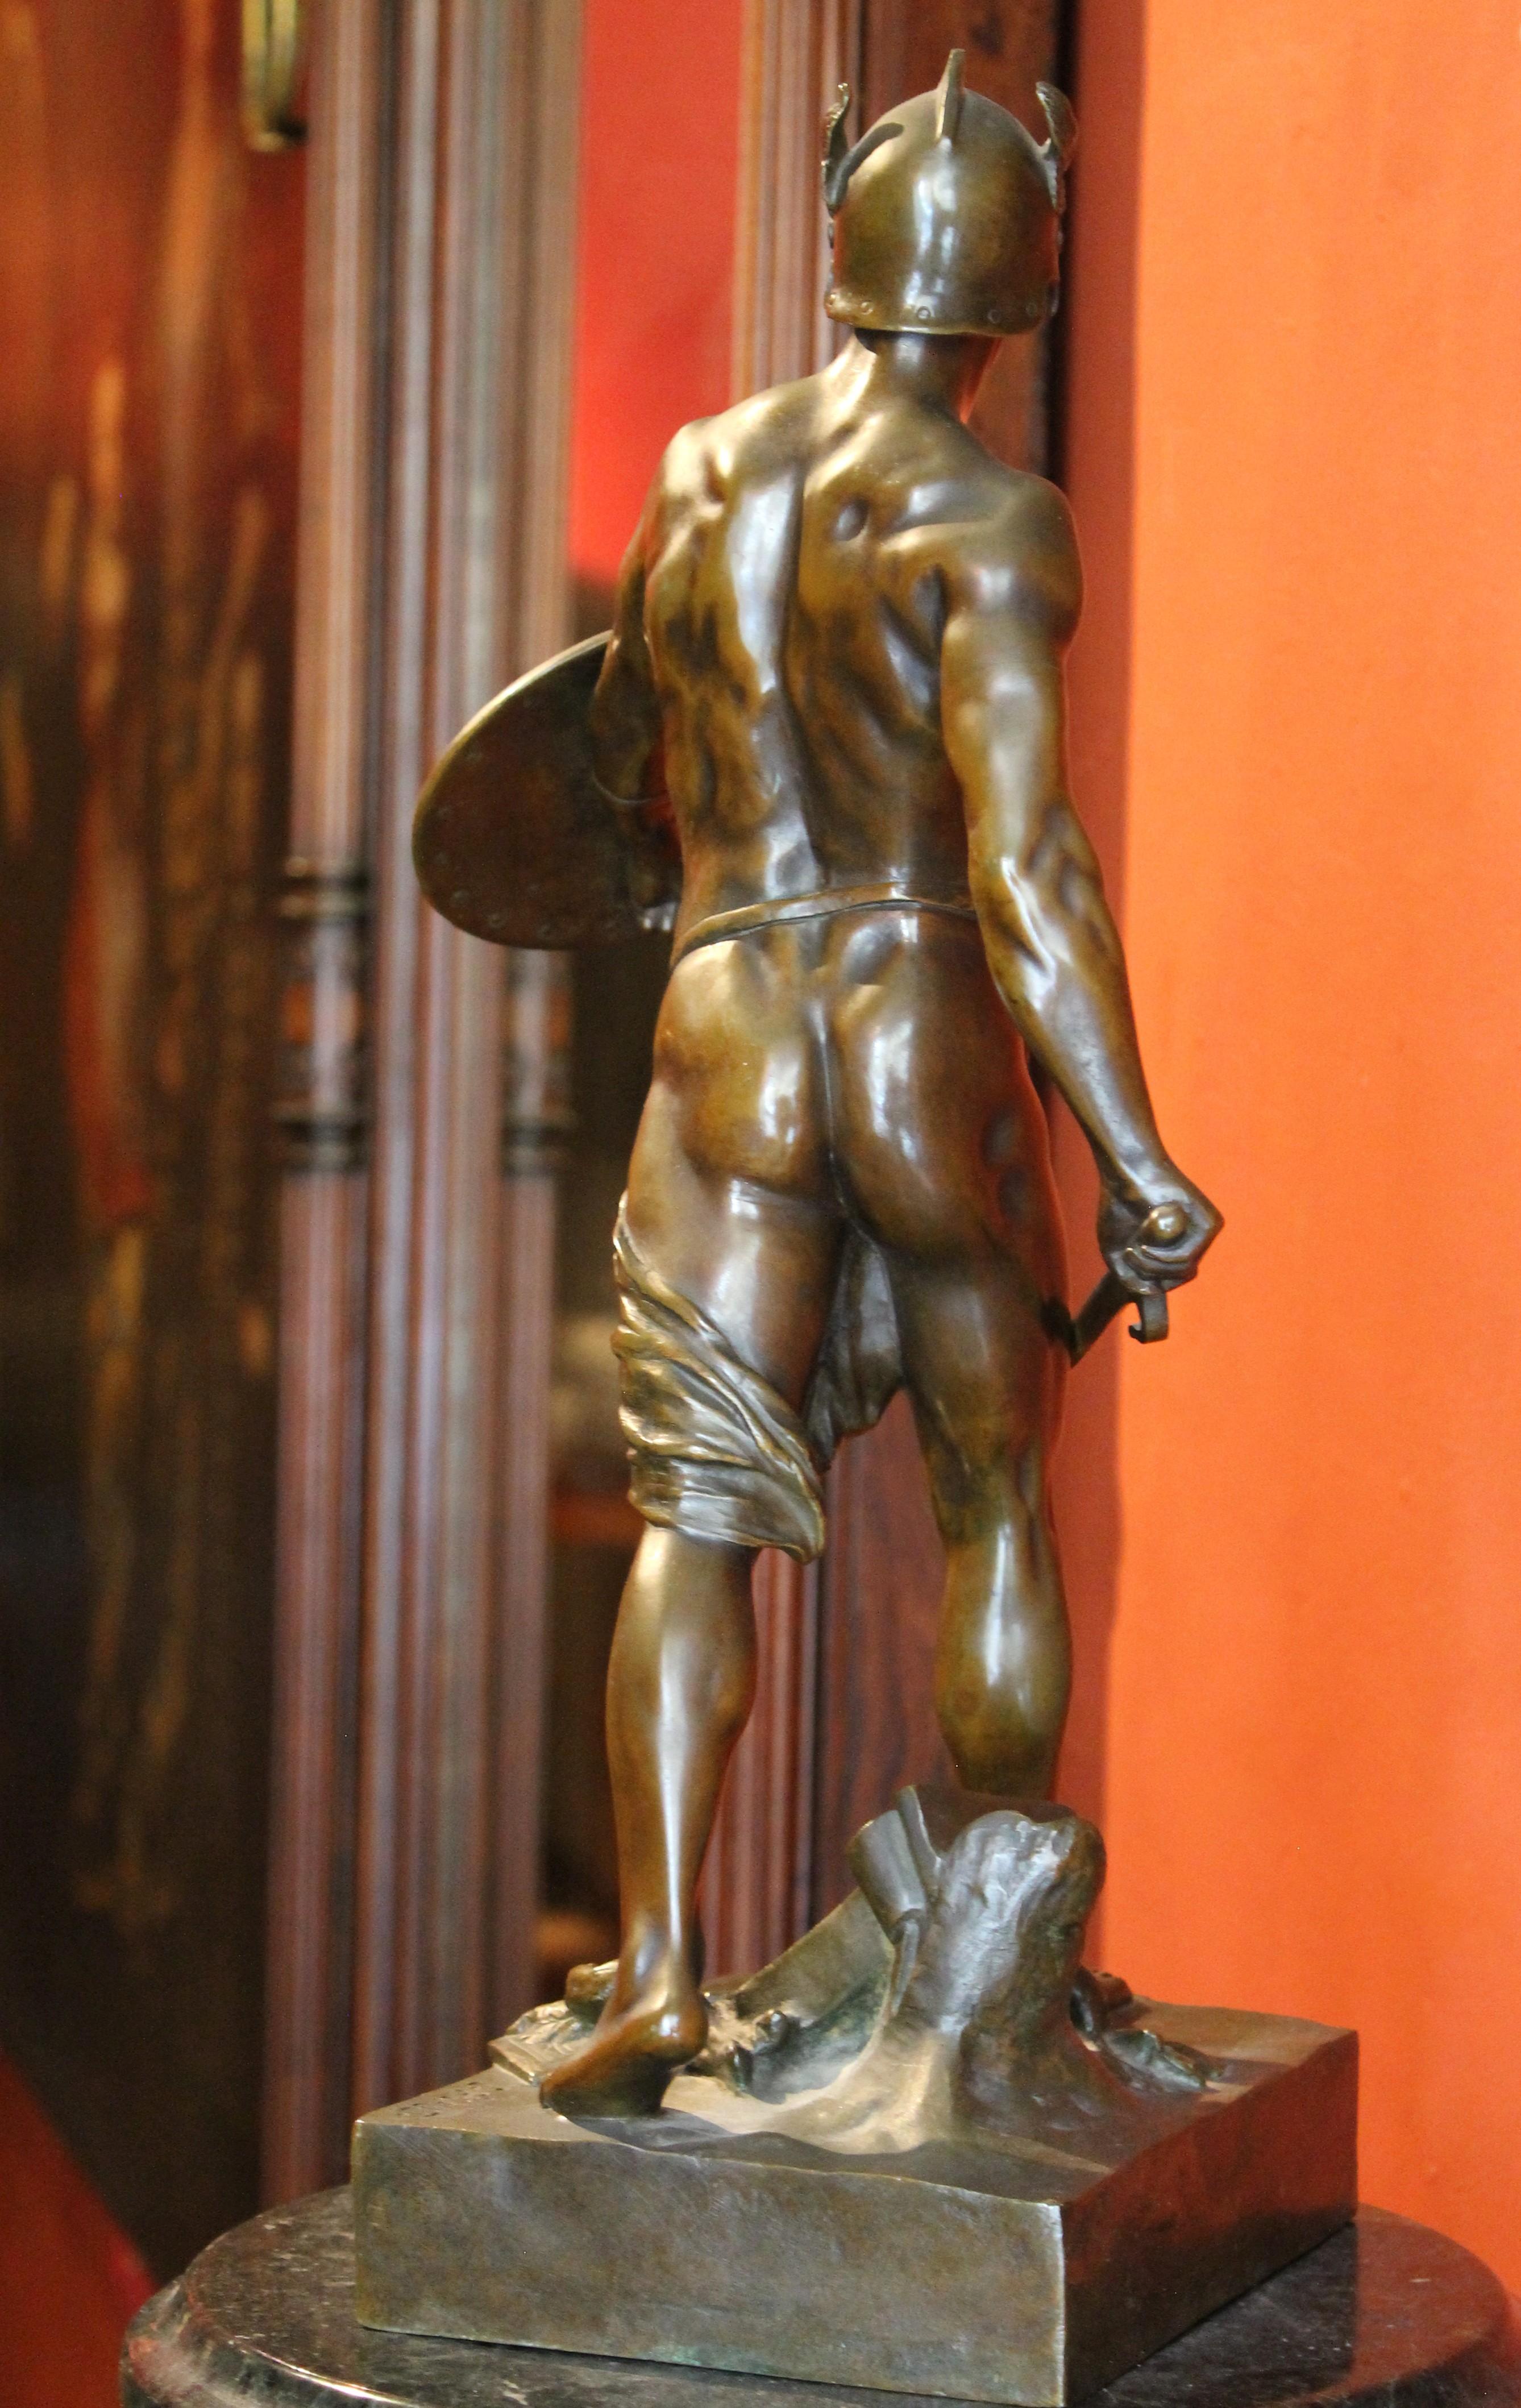 This extraordinary French burnished bronze figurative sculpture featuring a Gallic warrior victorious over the Roman legion was crafted in late 19th Century (1890 ca) by famed French sculptor E´mile-Louis Picault, one of the most celebrated